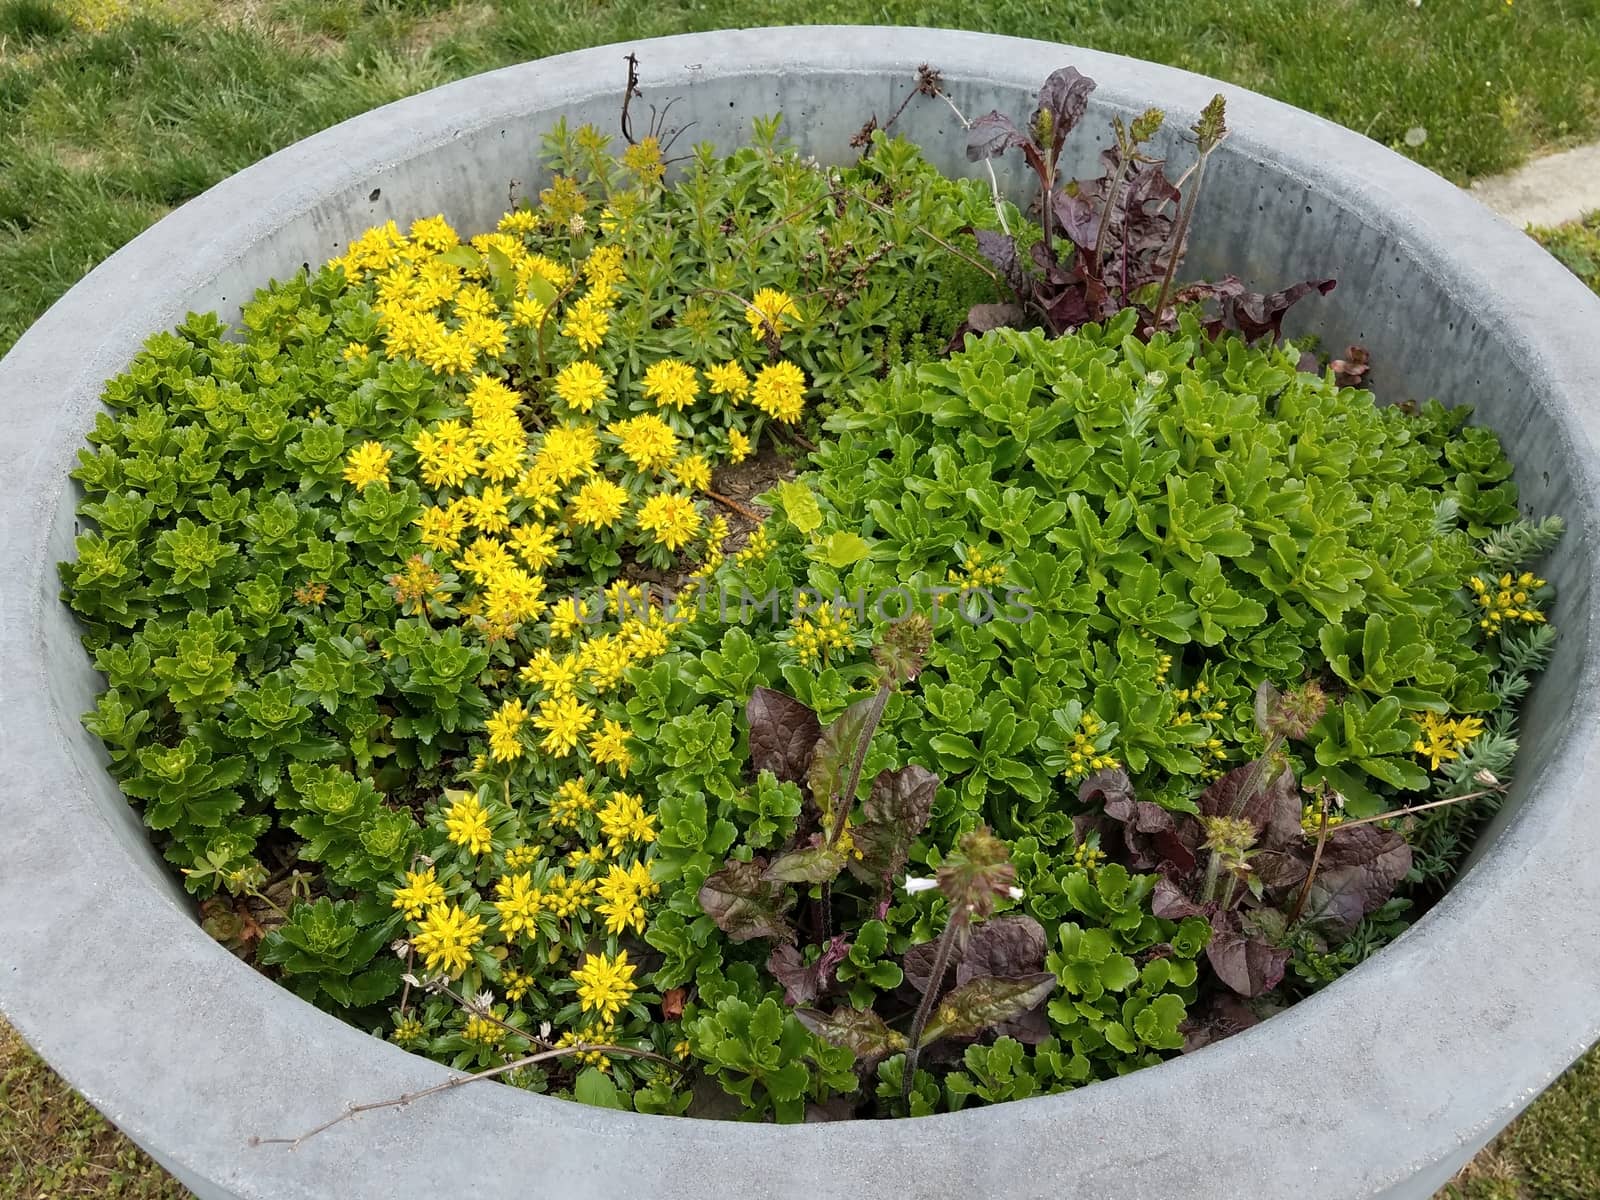 plant with green leaves and yellow flowers in cement flower pot or container